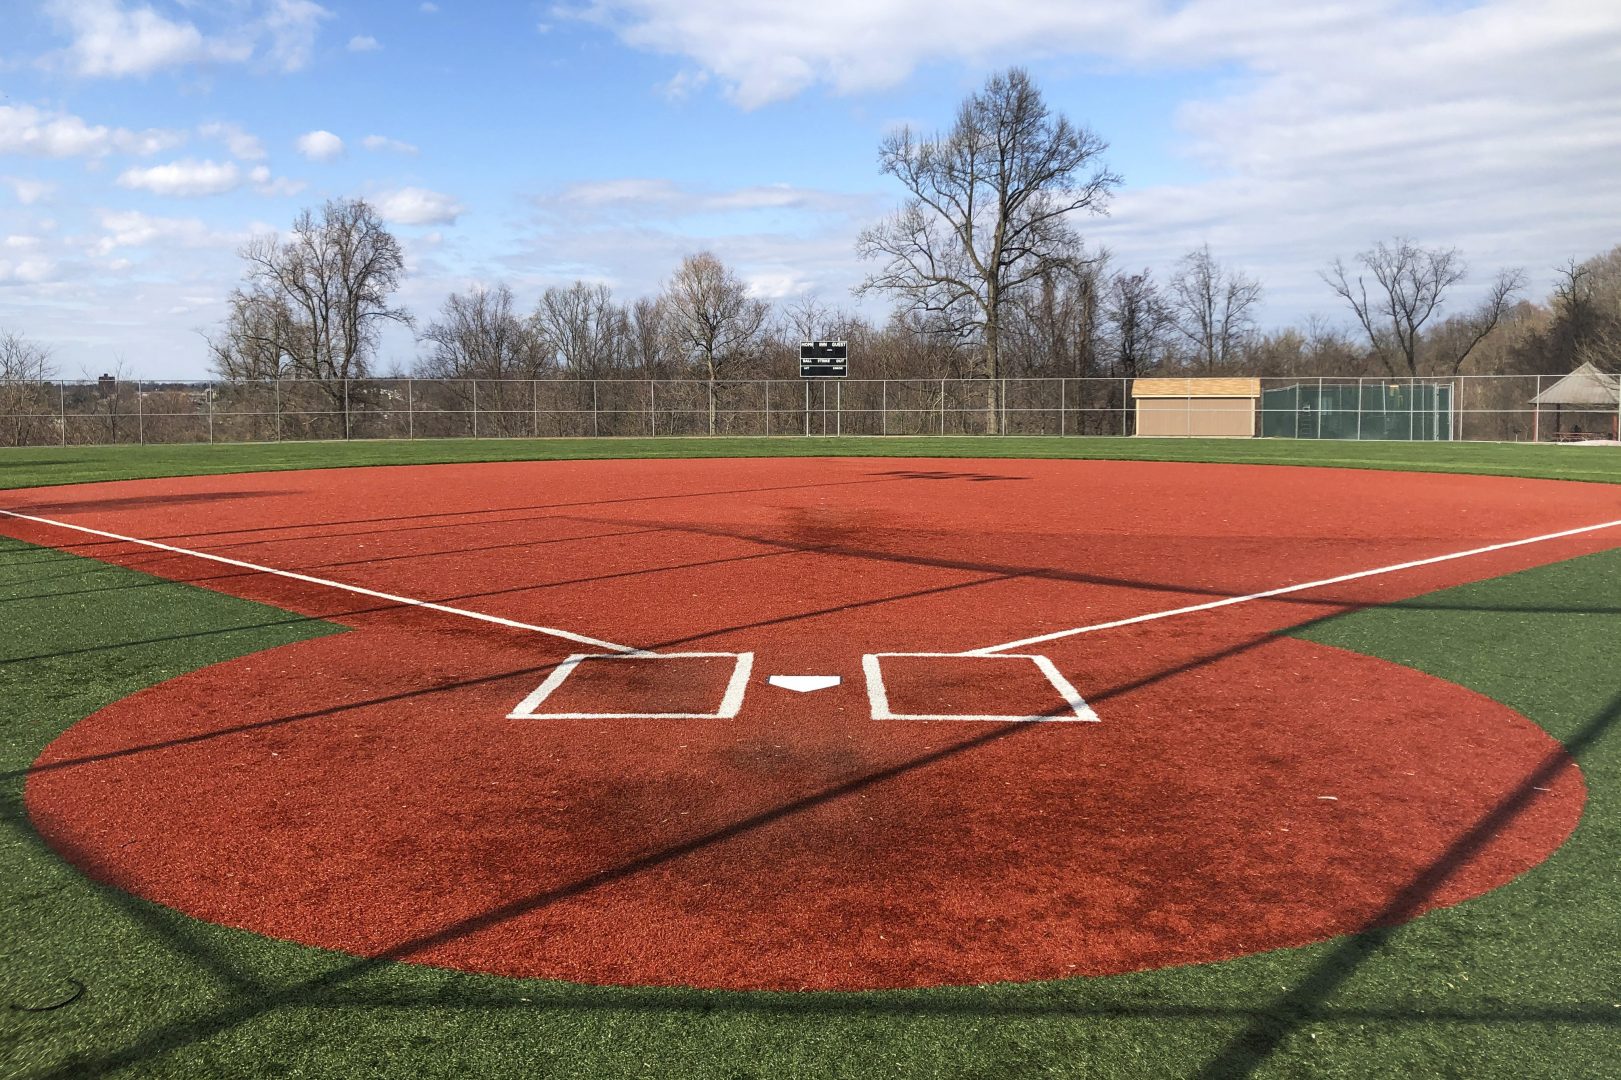 In this April 4, 2020, photo, a youth baseball field sits empty at Monroeville Park in Monroeville, Pa.